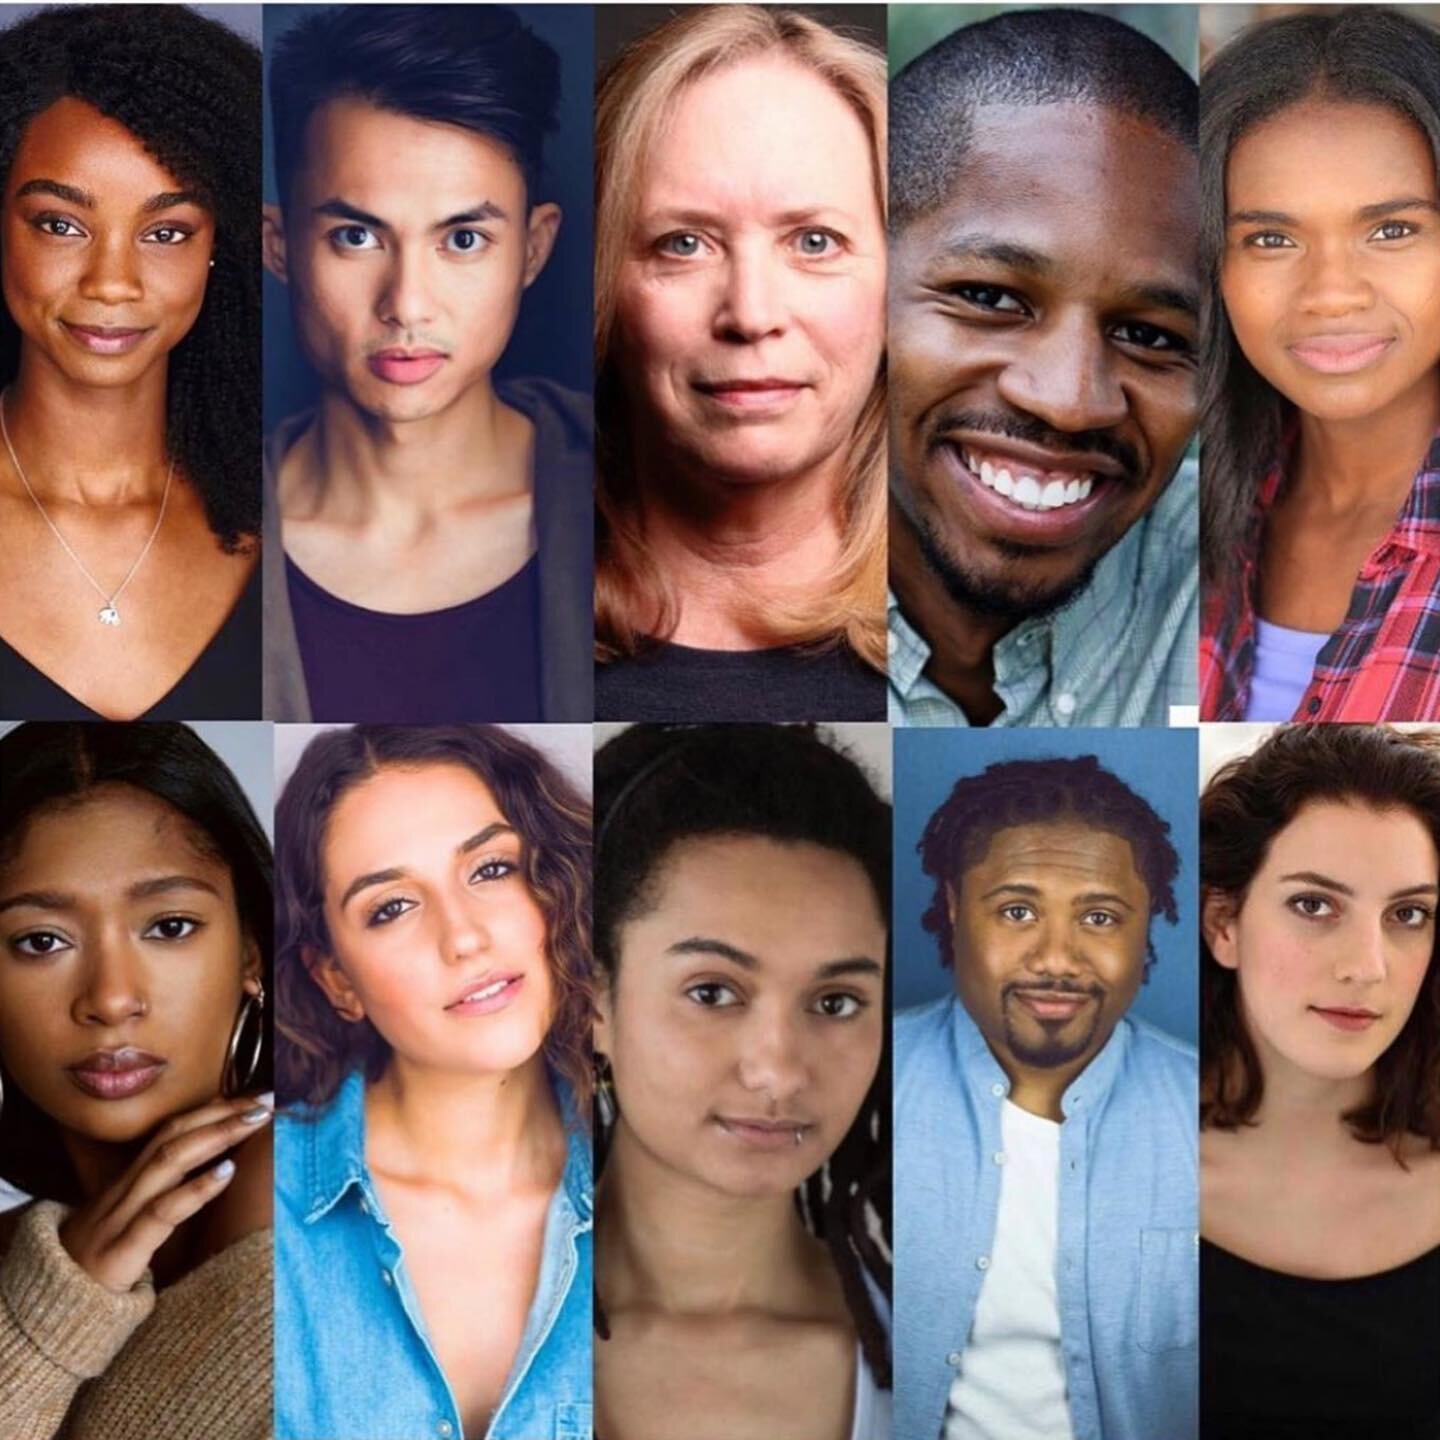 We're the cast of GEN! 🎭Written from the mind of @makattackssnacks &amp; directed by @melissa.mowry . Special thank you to @kervigoensemble for supporting collaboration, accessibility, and so much more. ✨

Grab a ticket to this world premiere and we